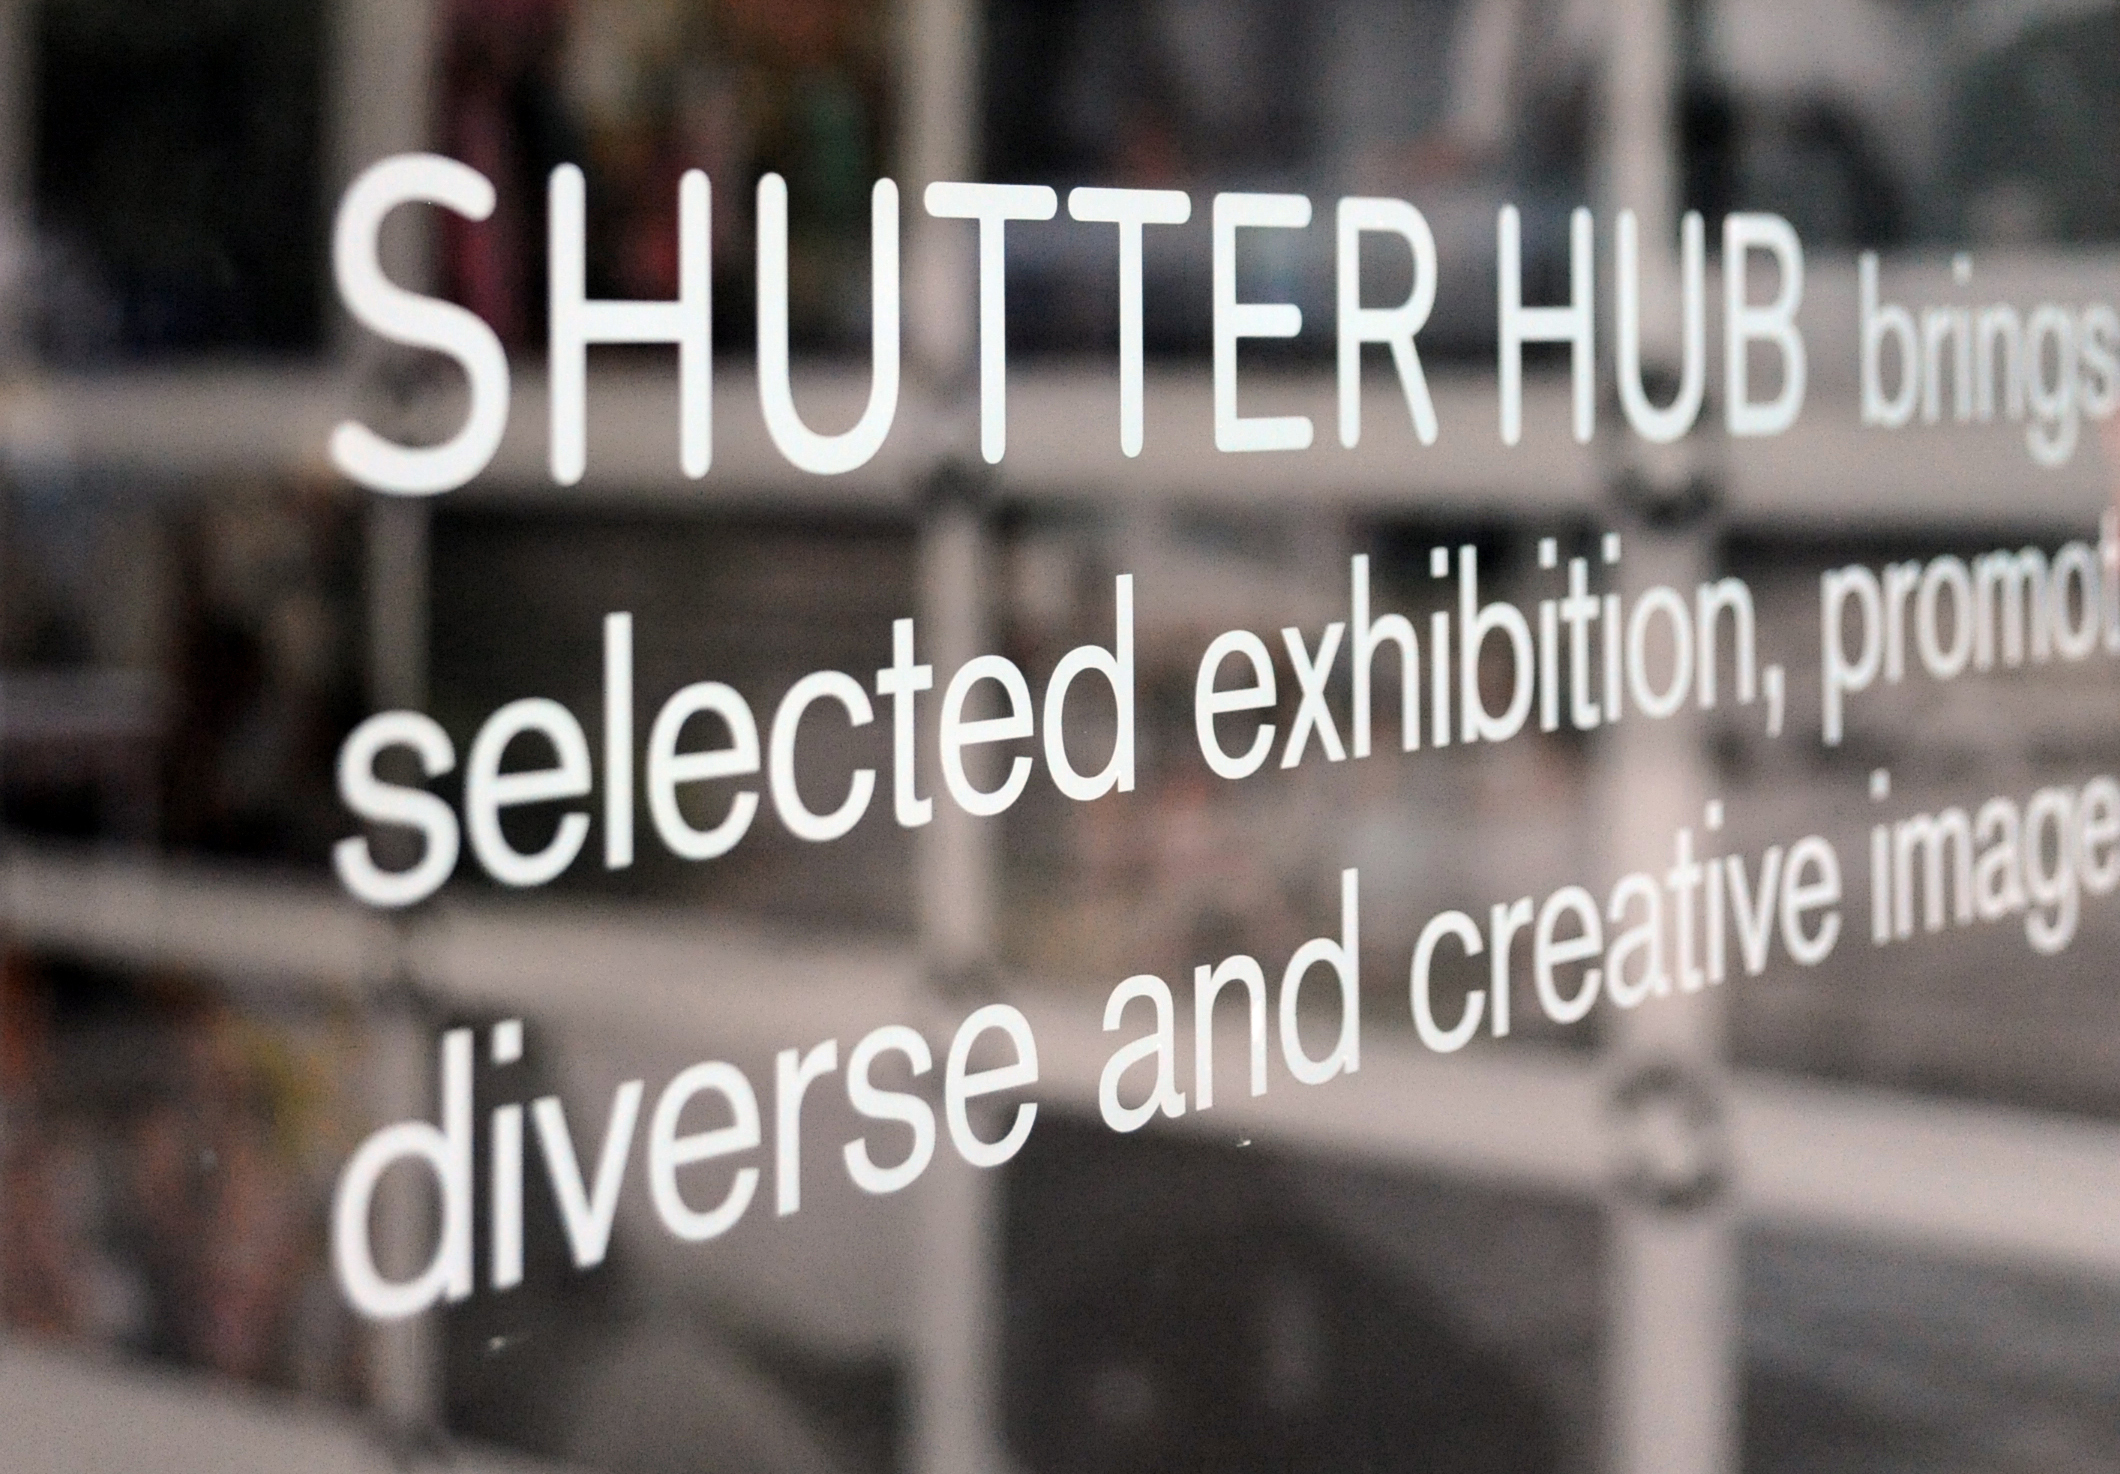 Photograph of white text on a window, with photographs from an exhibition out of focus in the background. The text says 'SHUTTER HUB brings, selected exhibition, promoting, diverse and creative images'